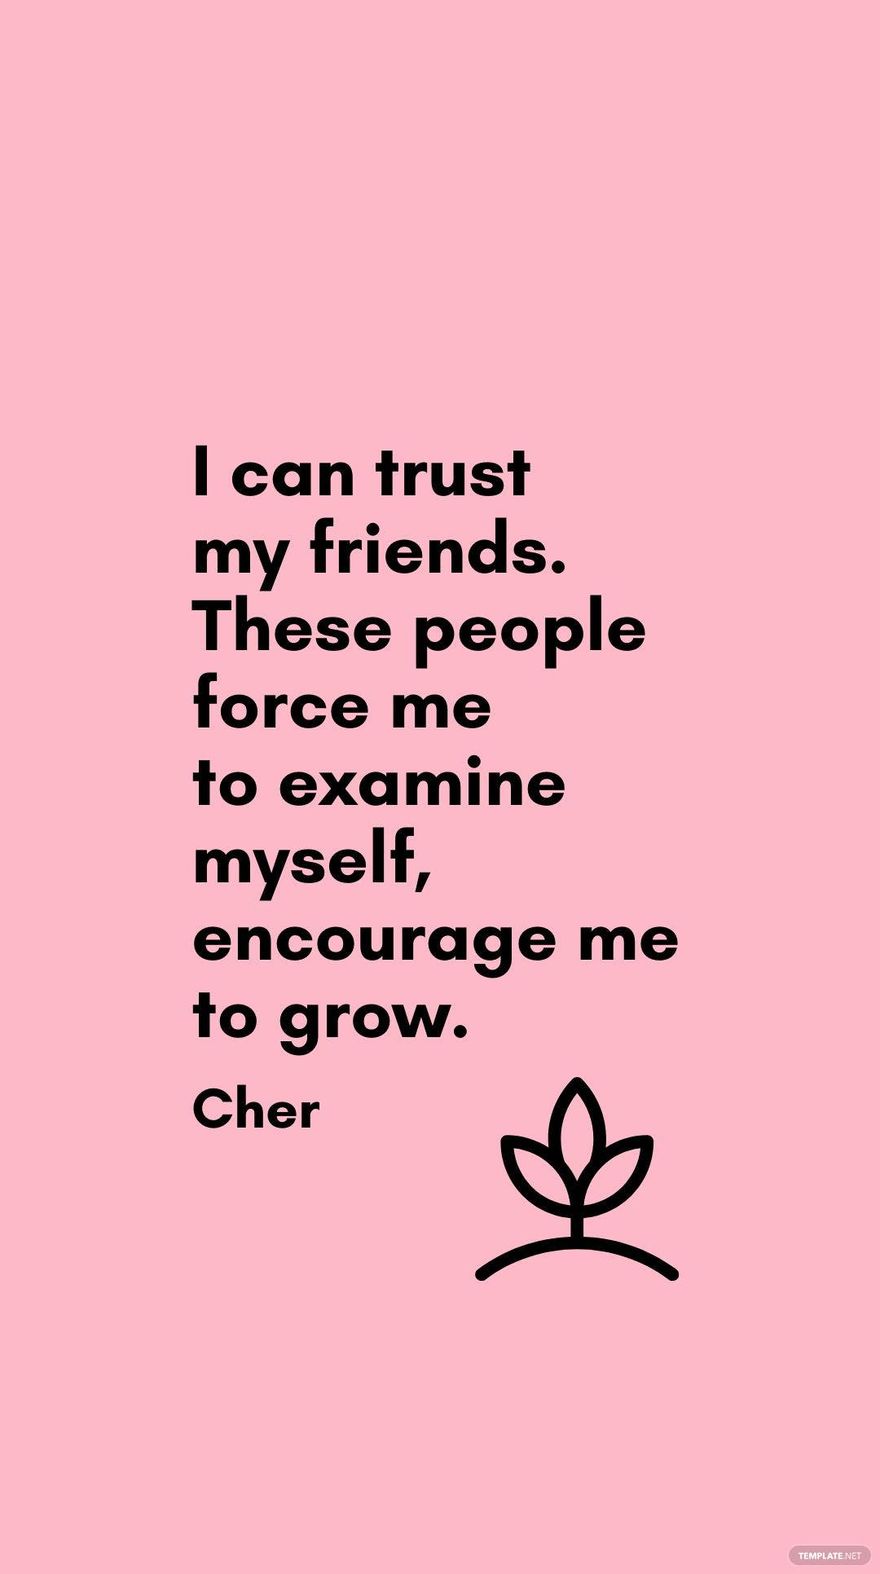 Free Cher - I can trust my friends. These people force me to examine myself, encourage me to grow. in JPG